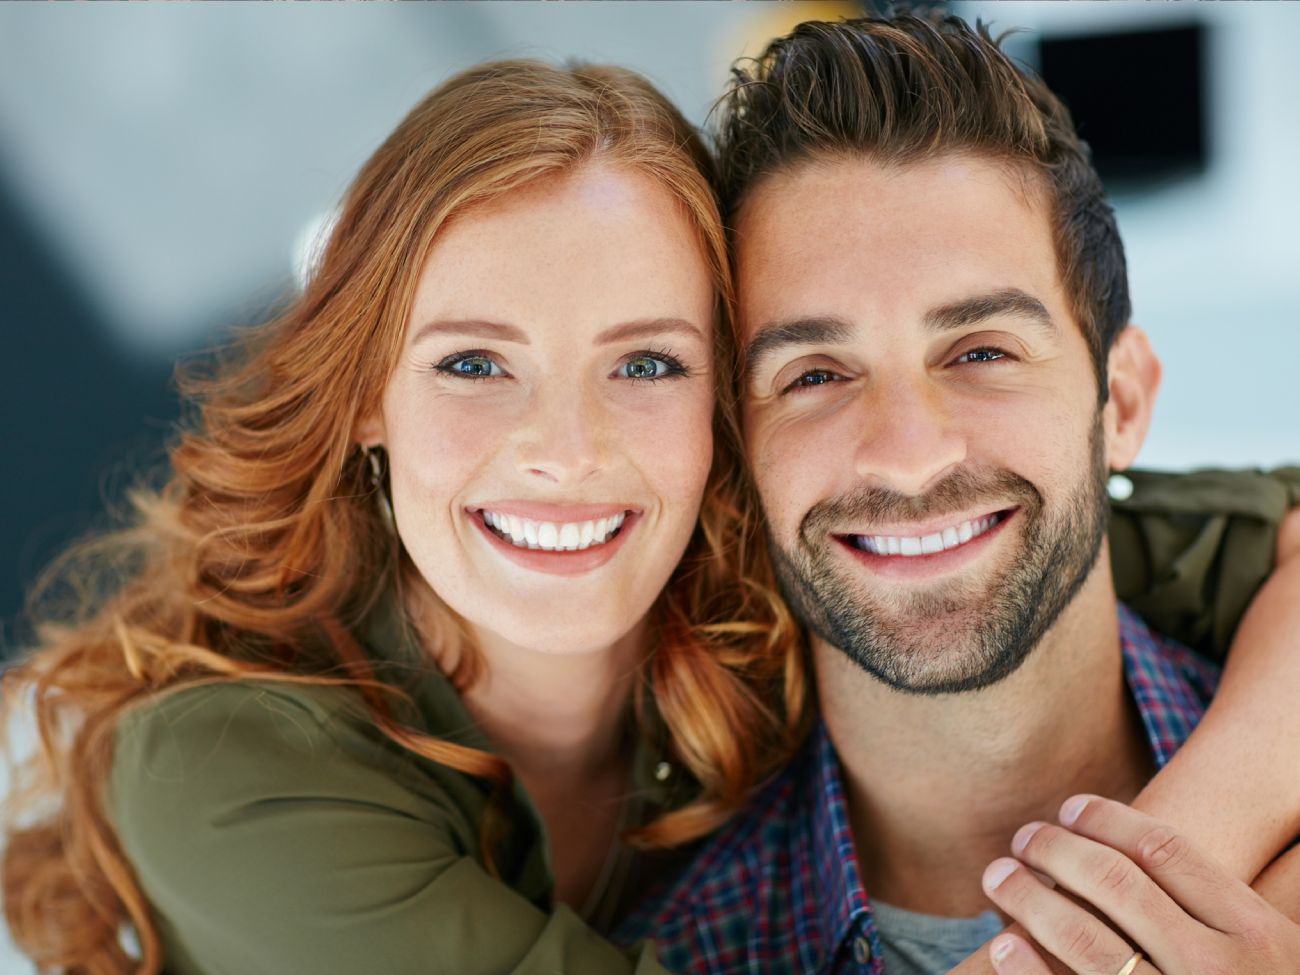 A woman and man cuddling and smiling